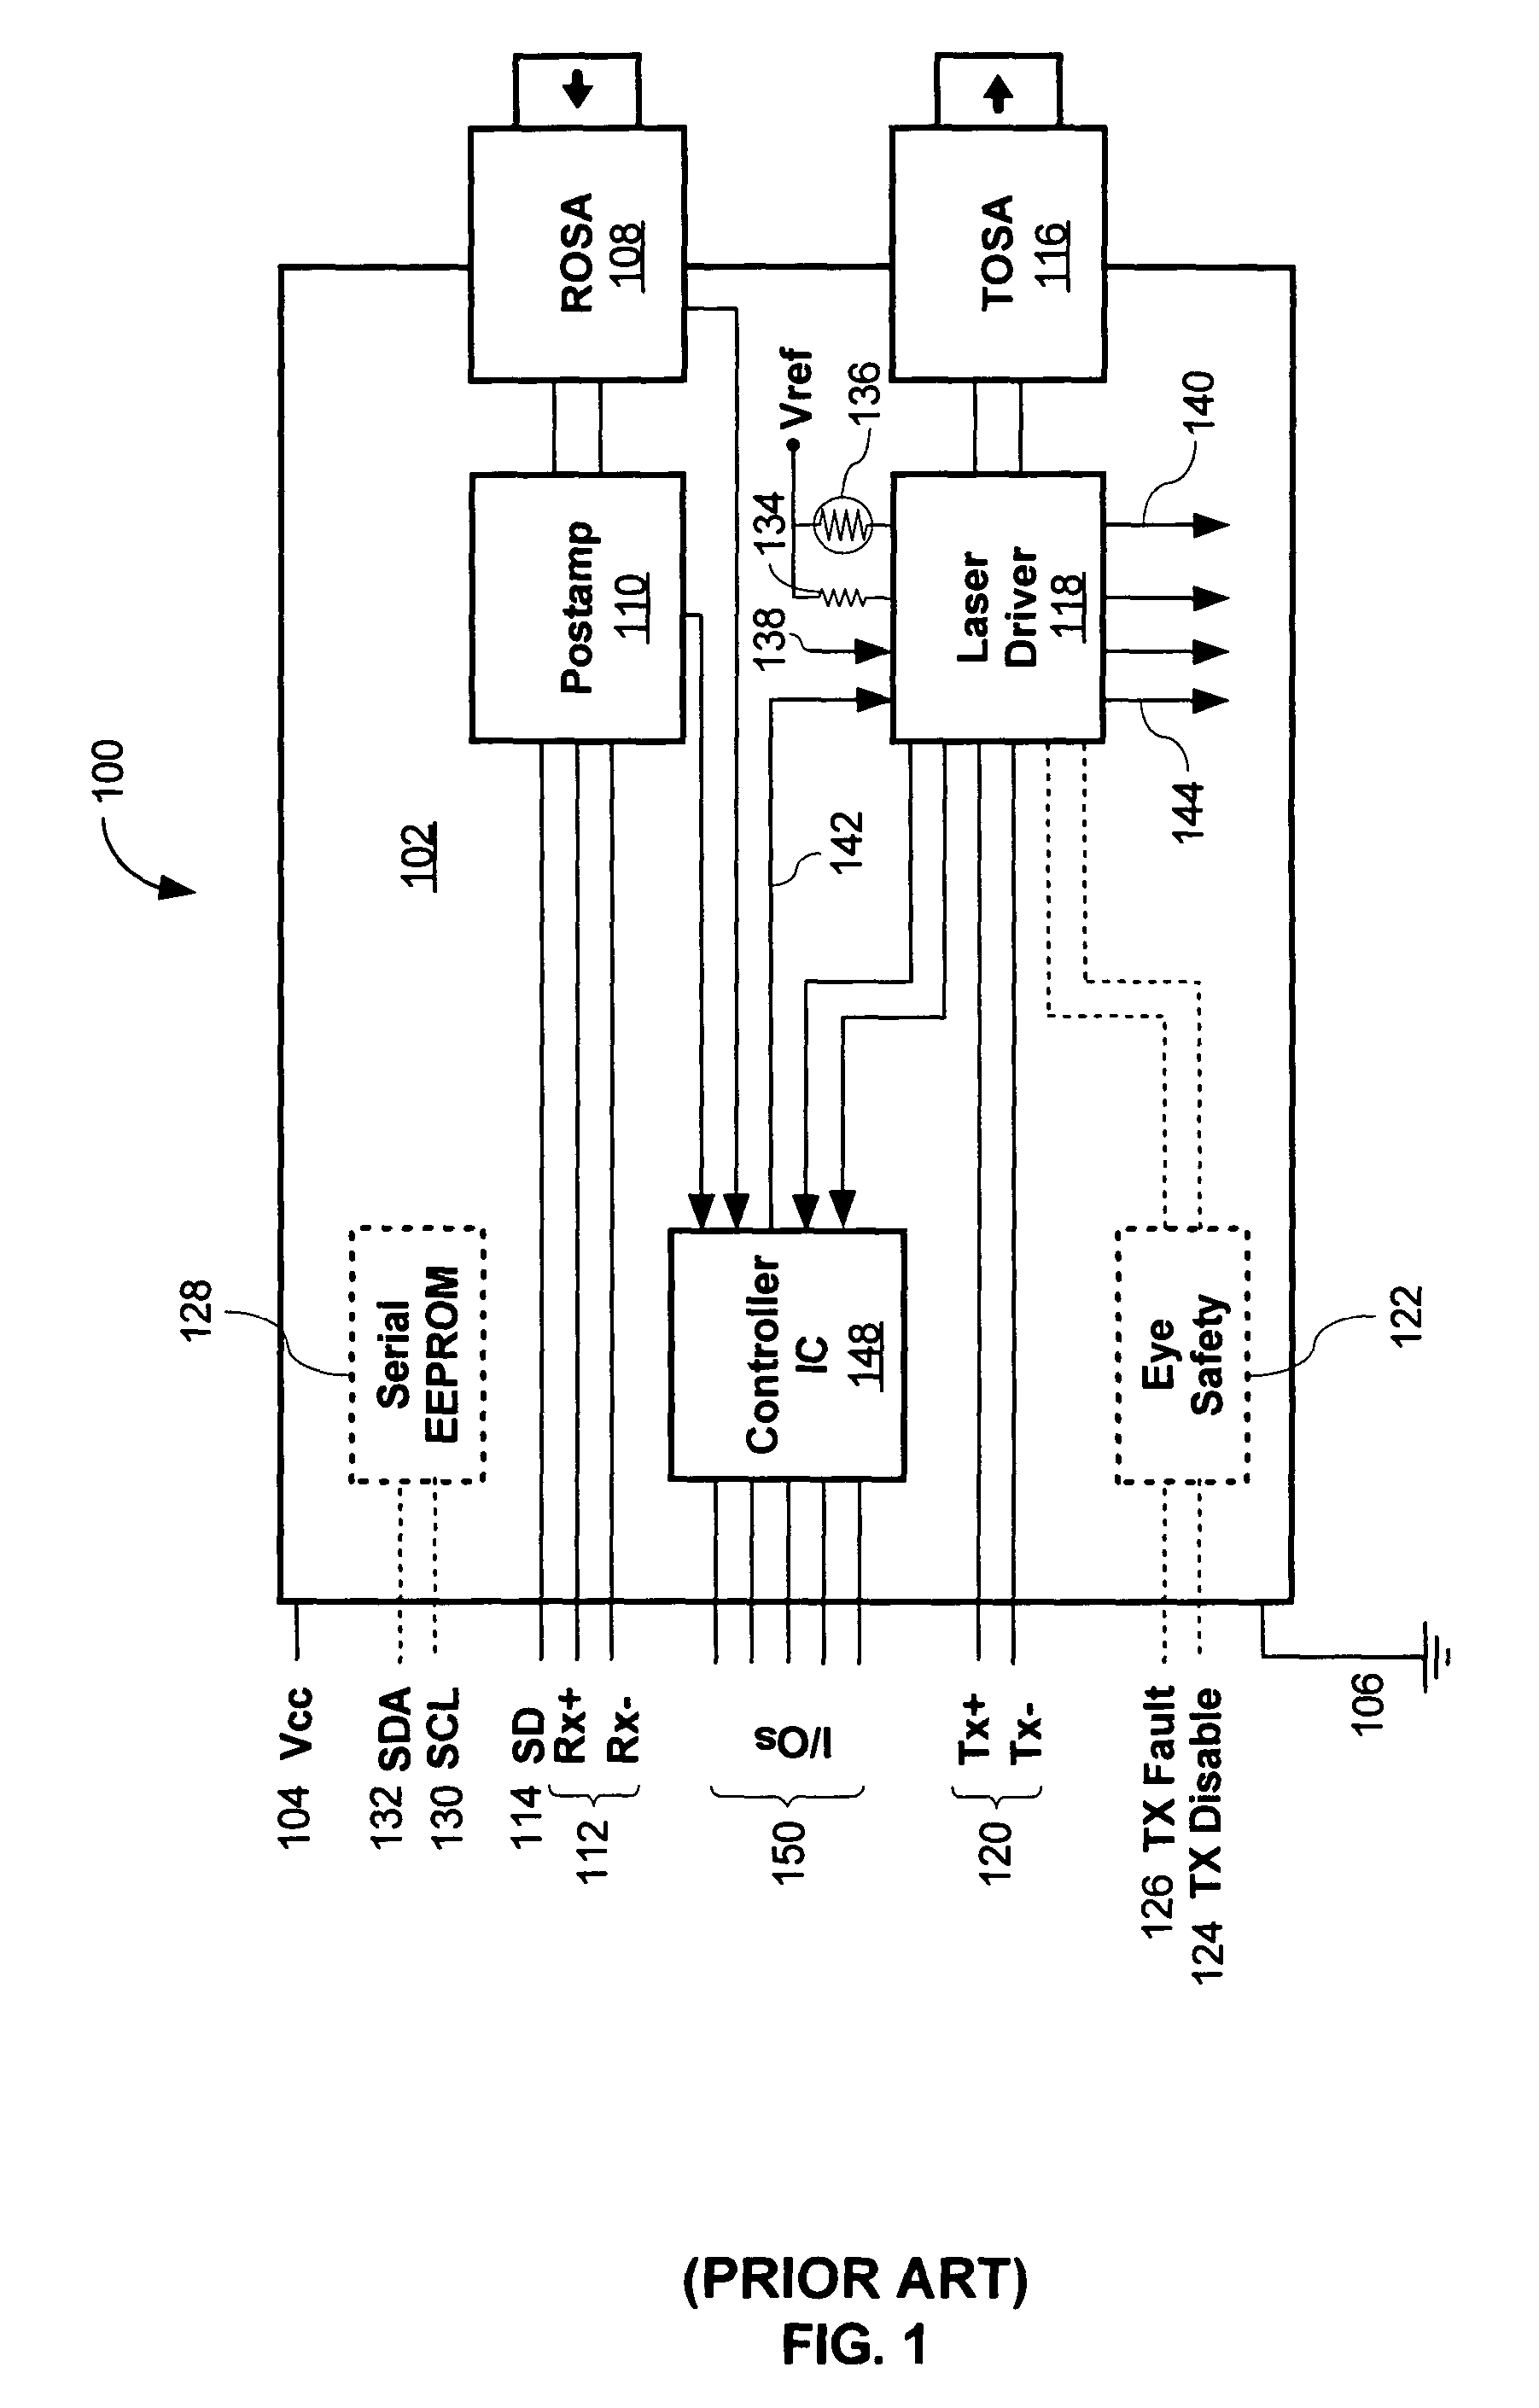 Optical transceiver module with power integrated circuit